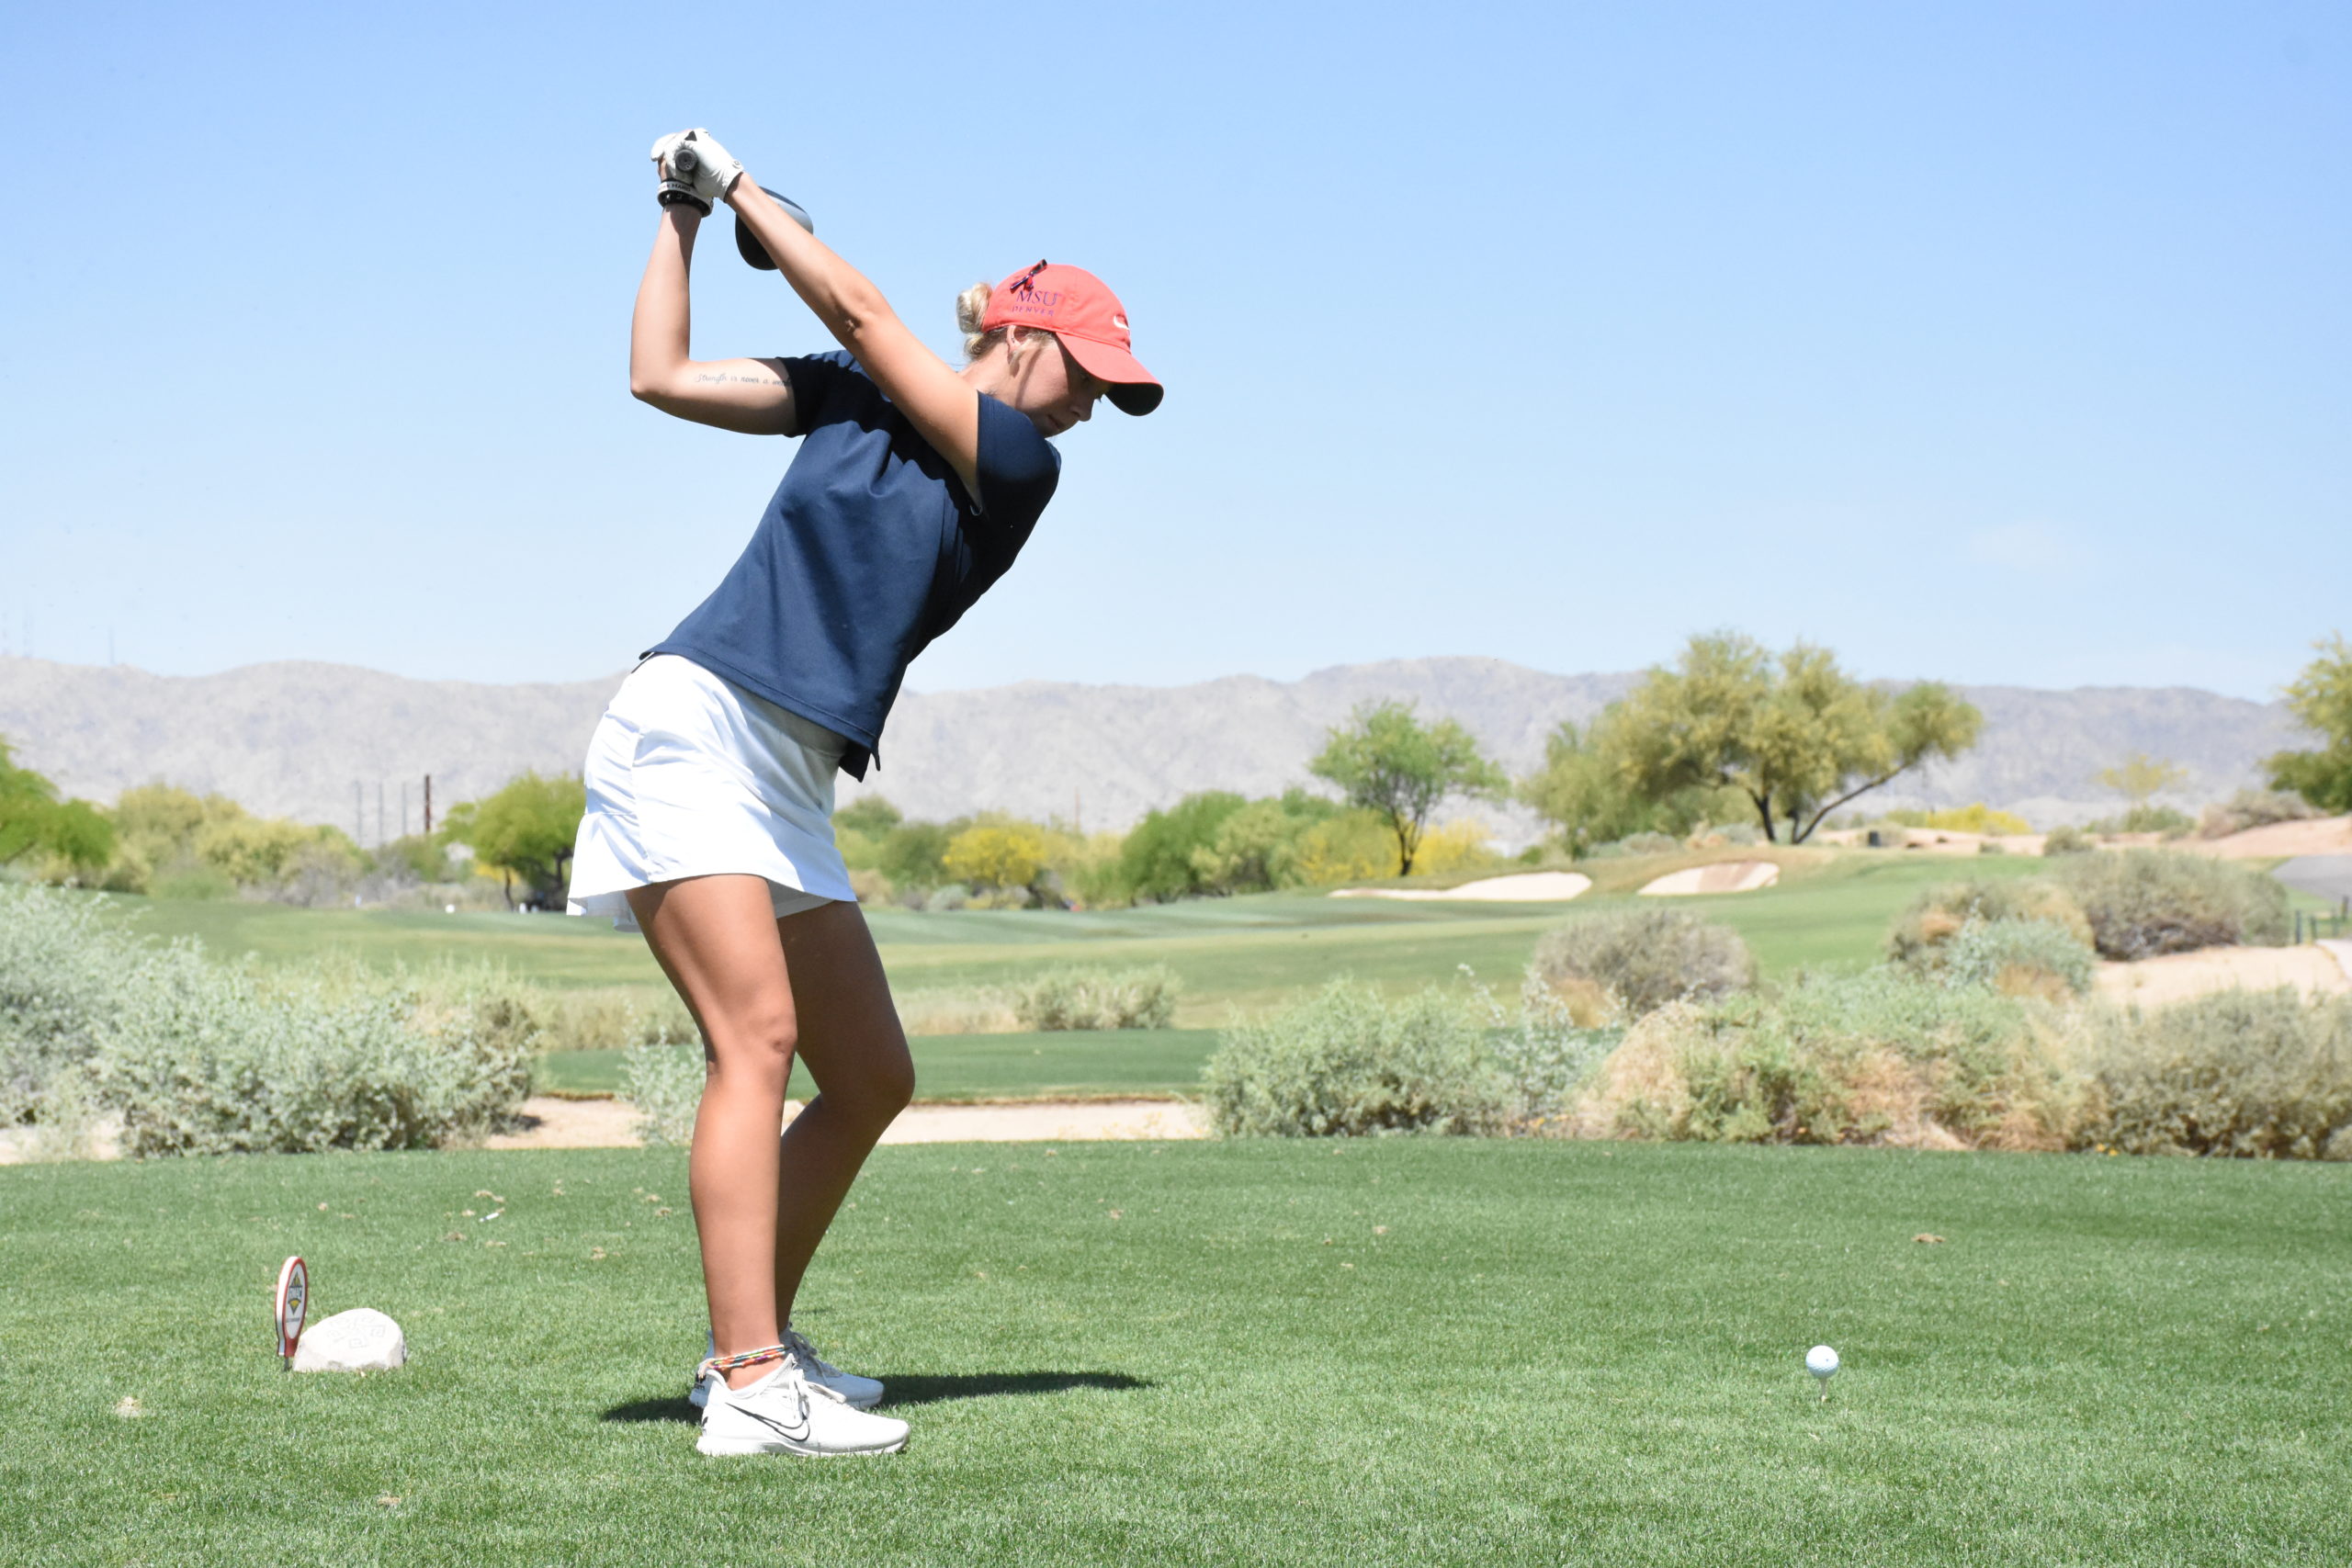 Golf athlete Courtney Lawler tees off at a desert golf course with a mountain range and trees in front of her.